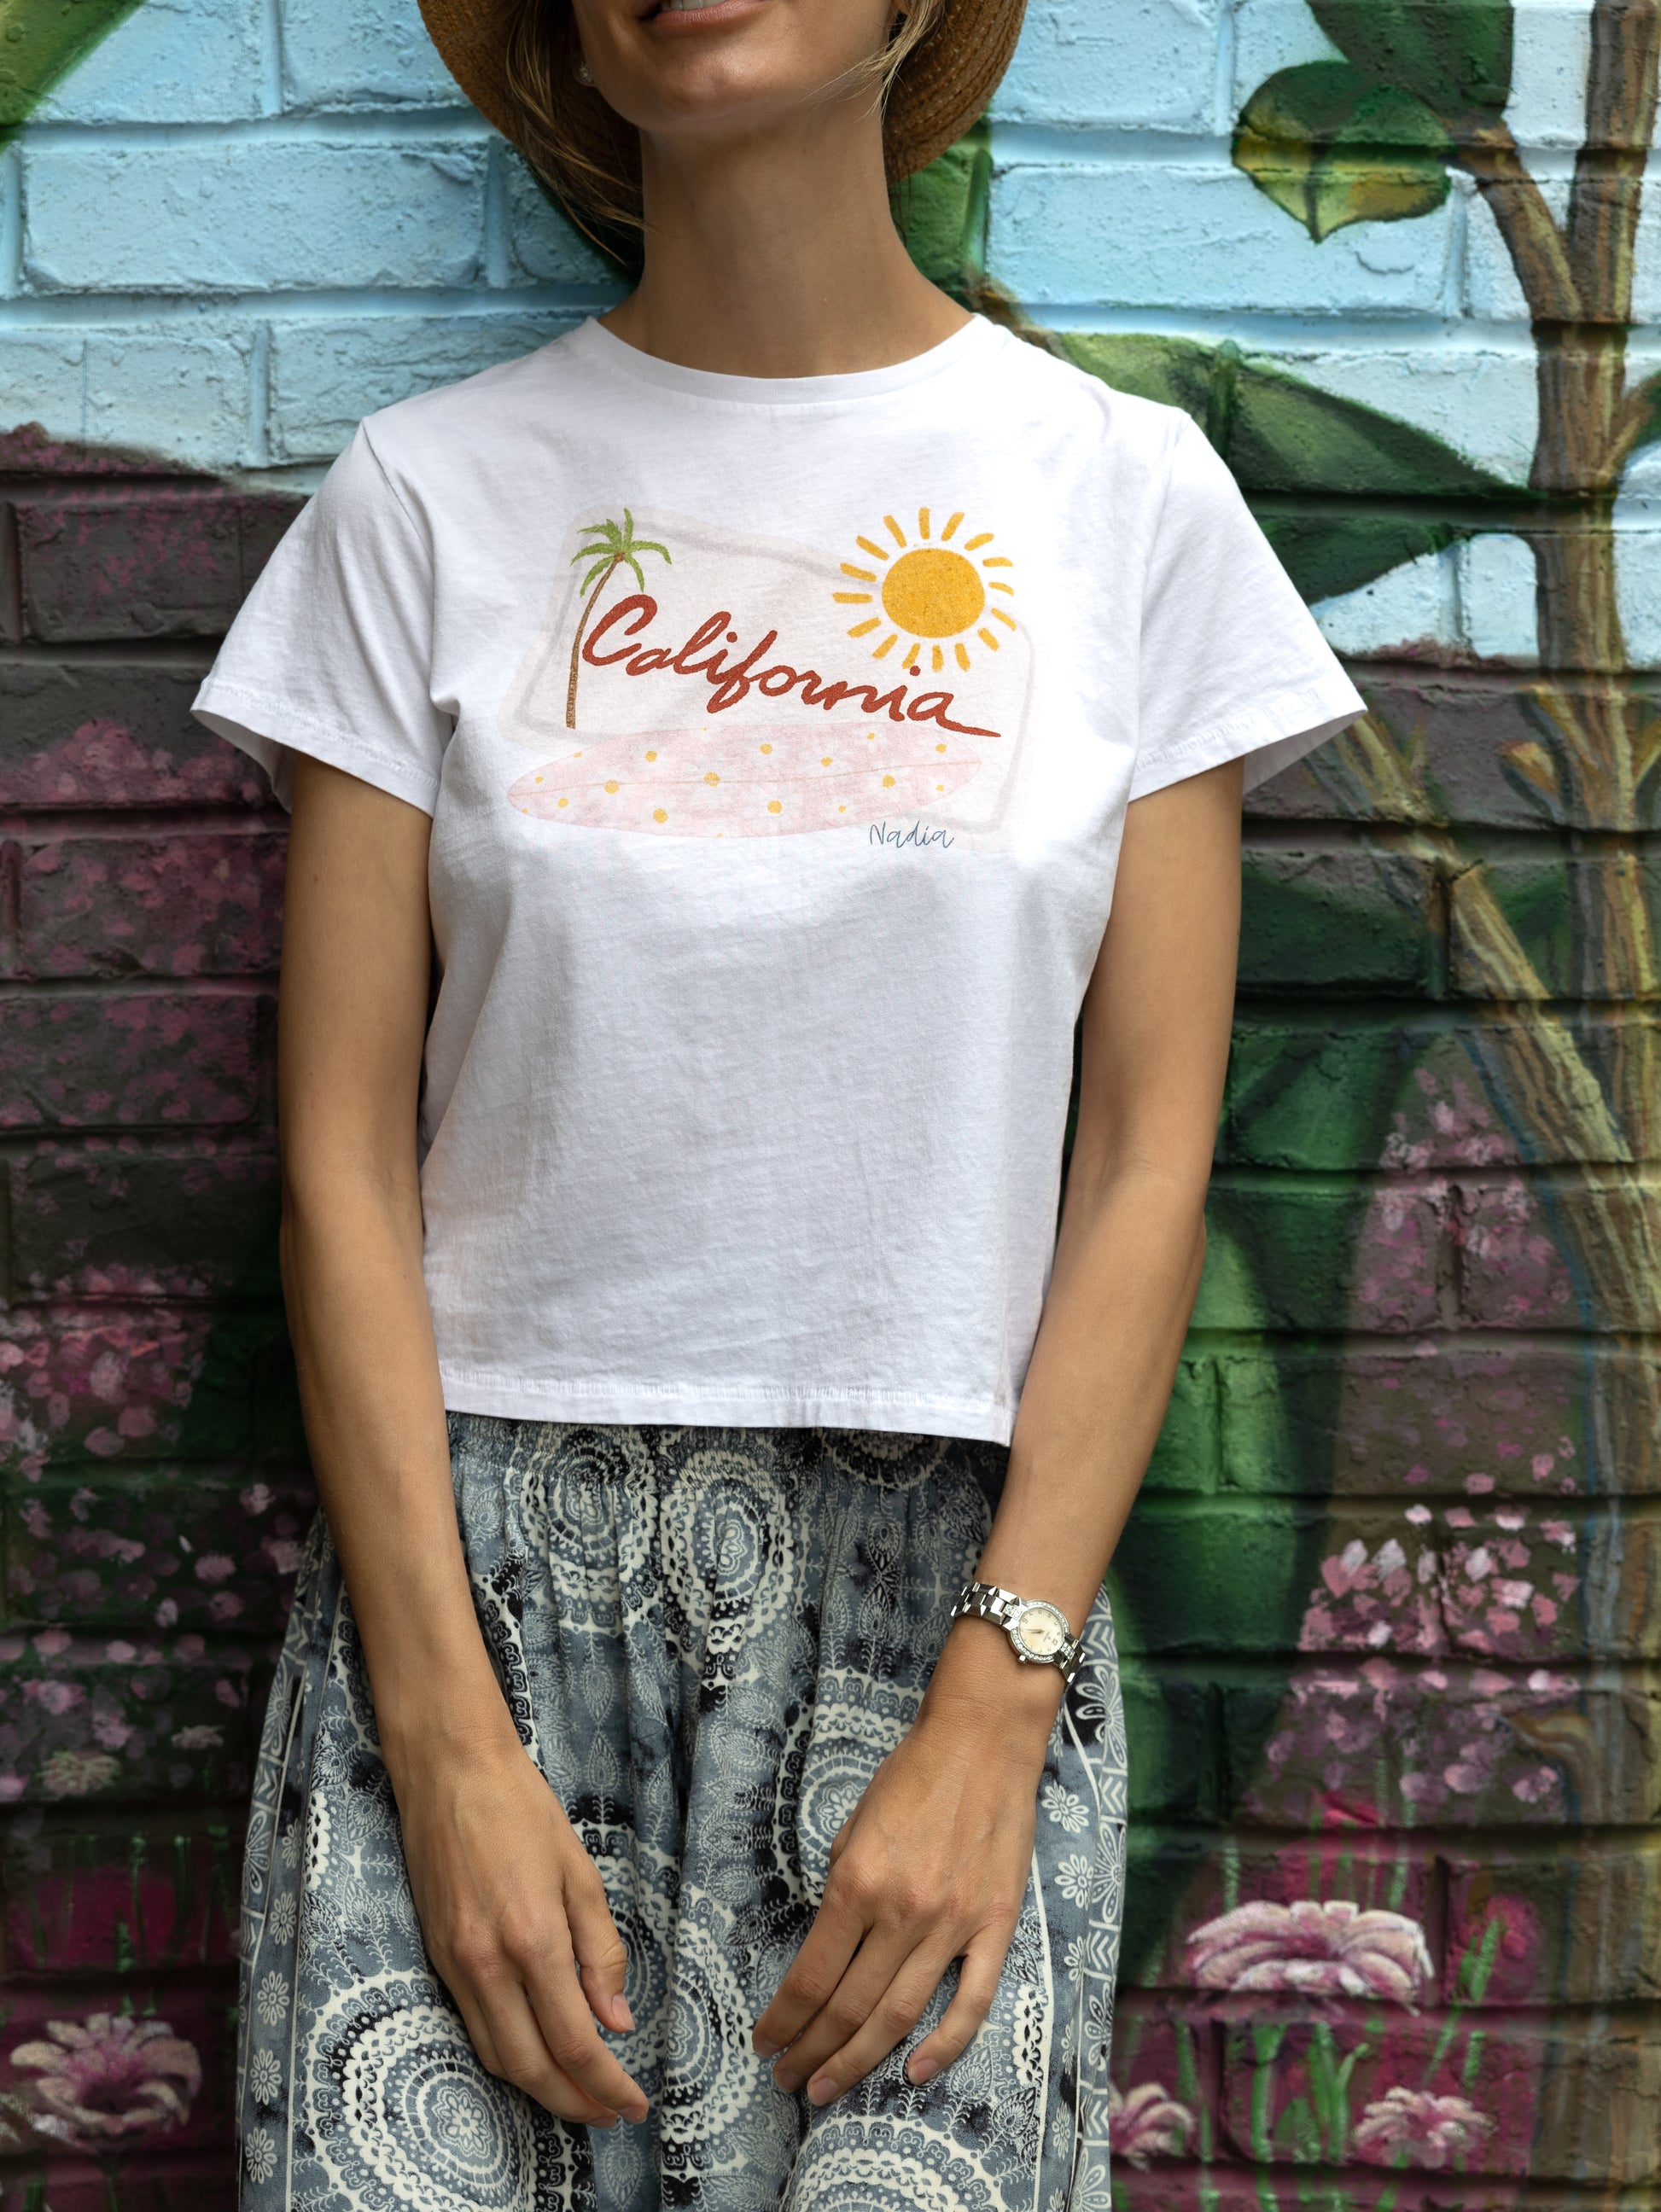 This tee is a Golden State of mind come true, featuring a hand-drawn design that's as cool as a Pacific Ocean breeze. A California license plate gets a rad makeover with a pink floral surfboard, palm tree, and sun - it's like a vacation for your wardrobe!